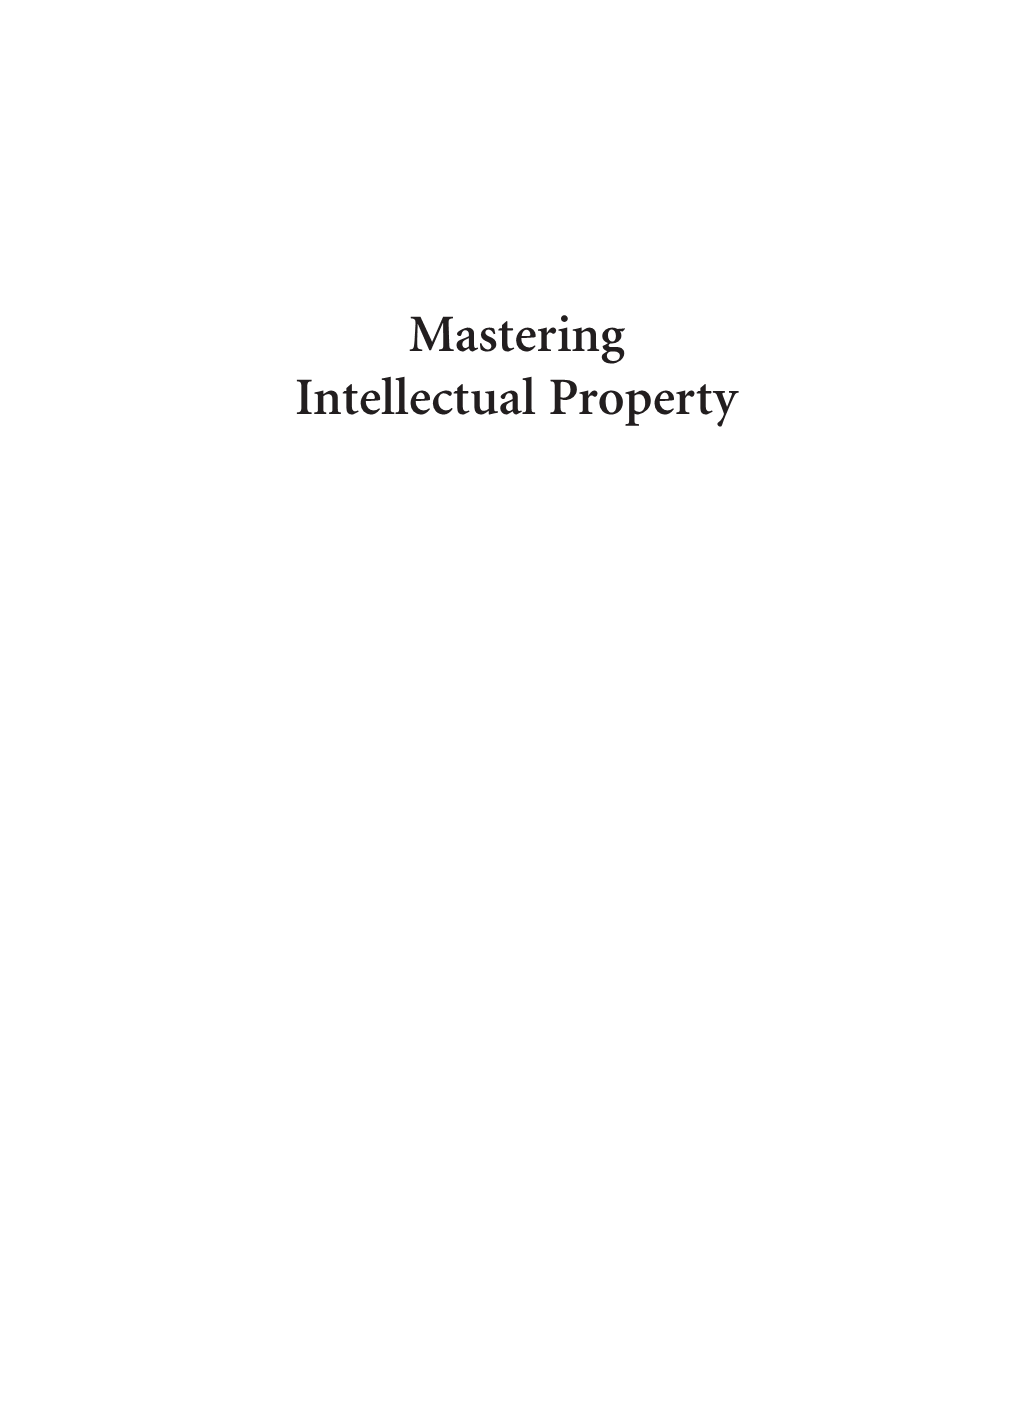 Mastering Intellectual Property 00 Kuney Cx3 10/1/08 4:28 PM Page Ii